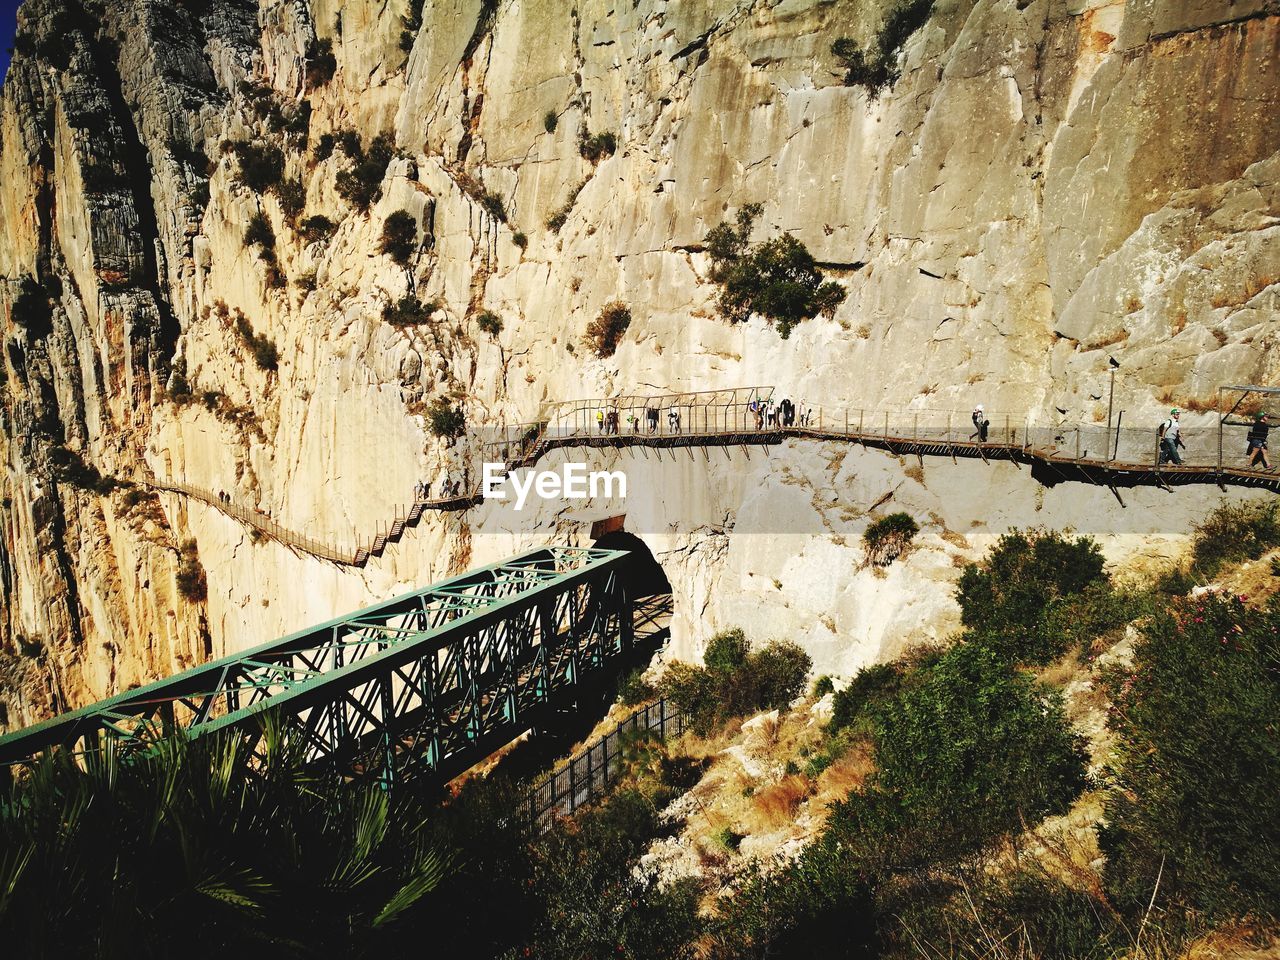 High angle view of rock formation on bridge